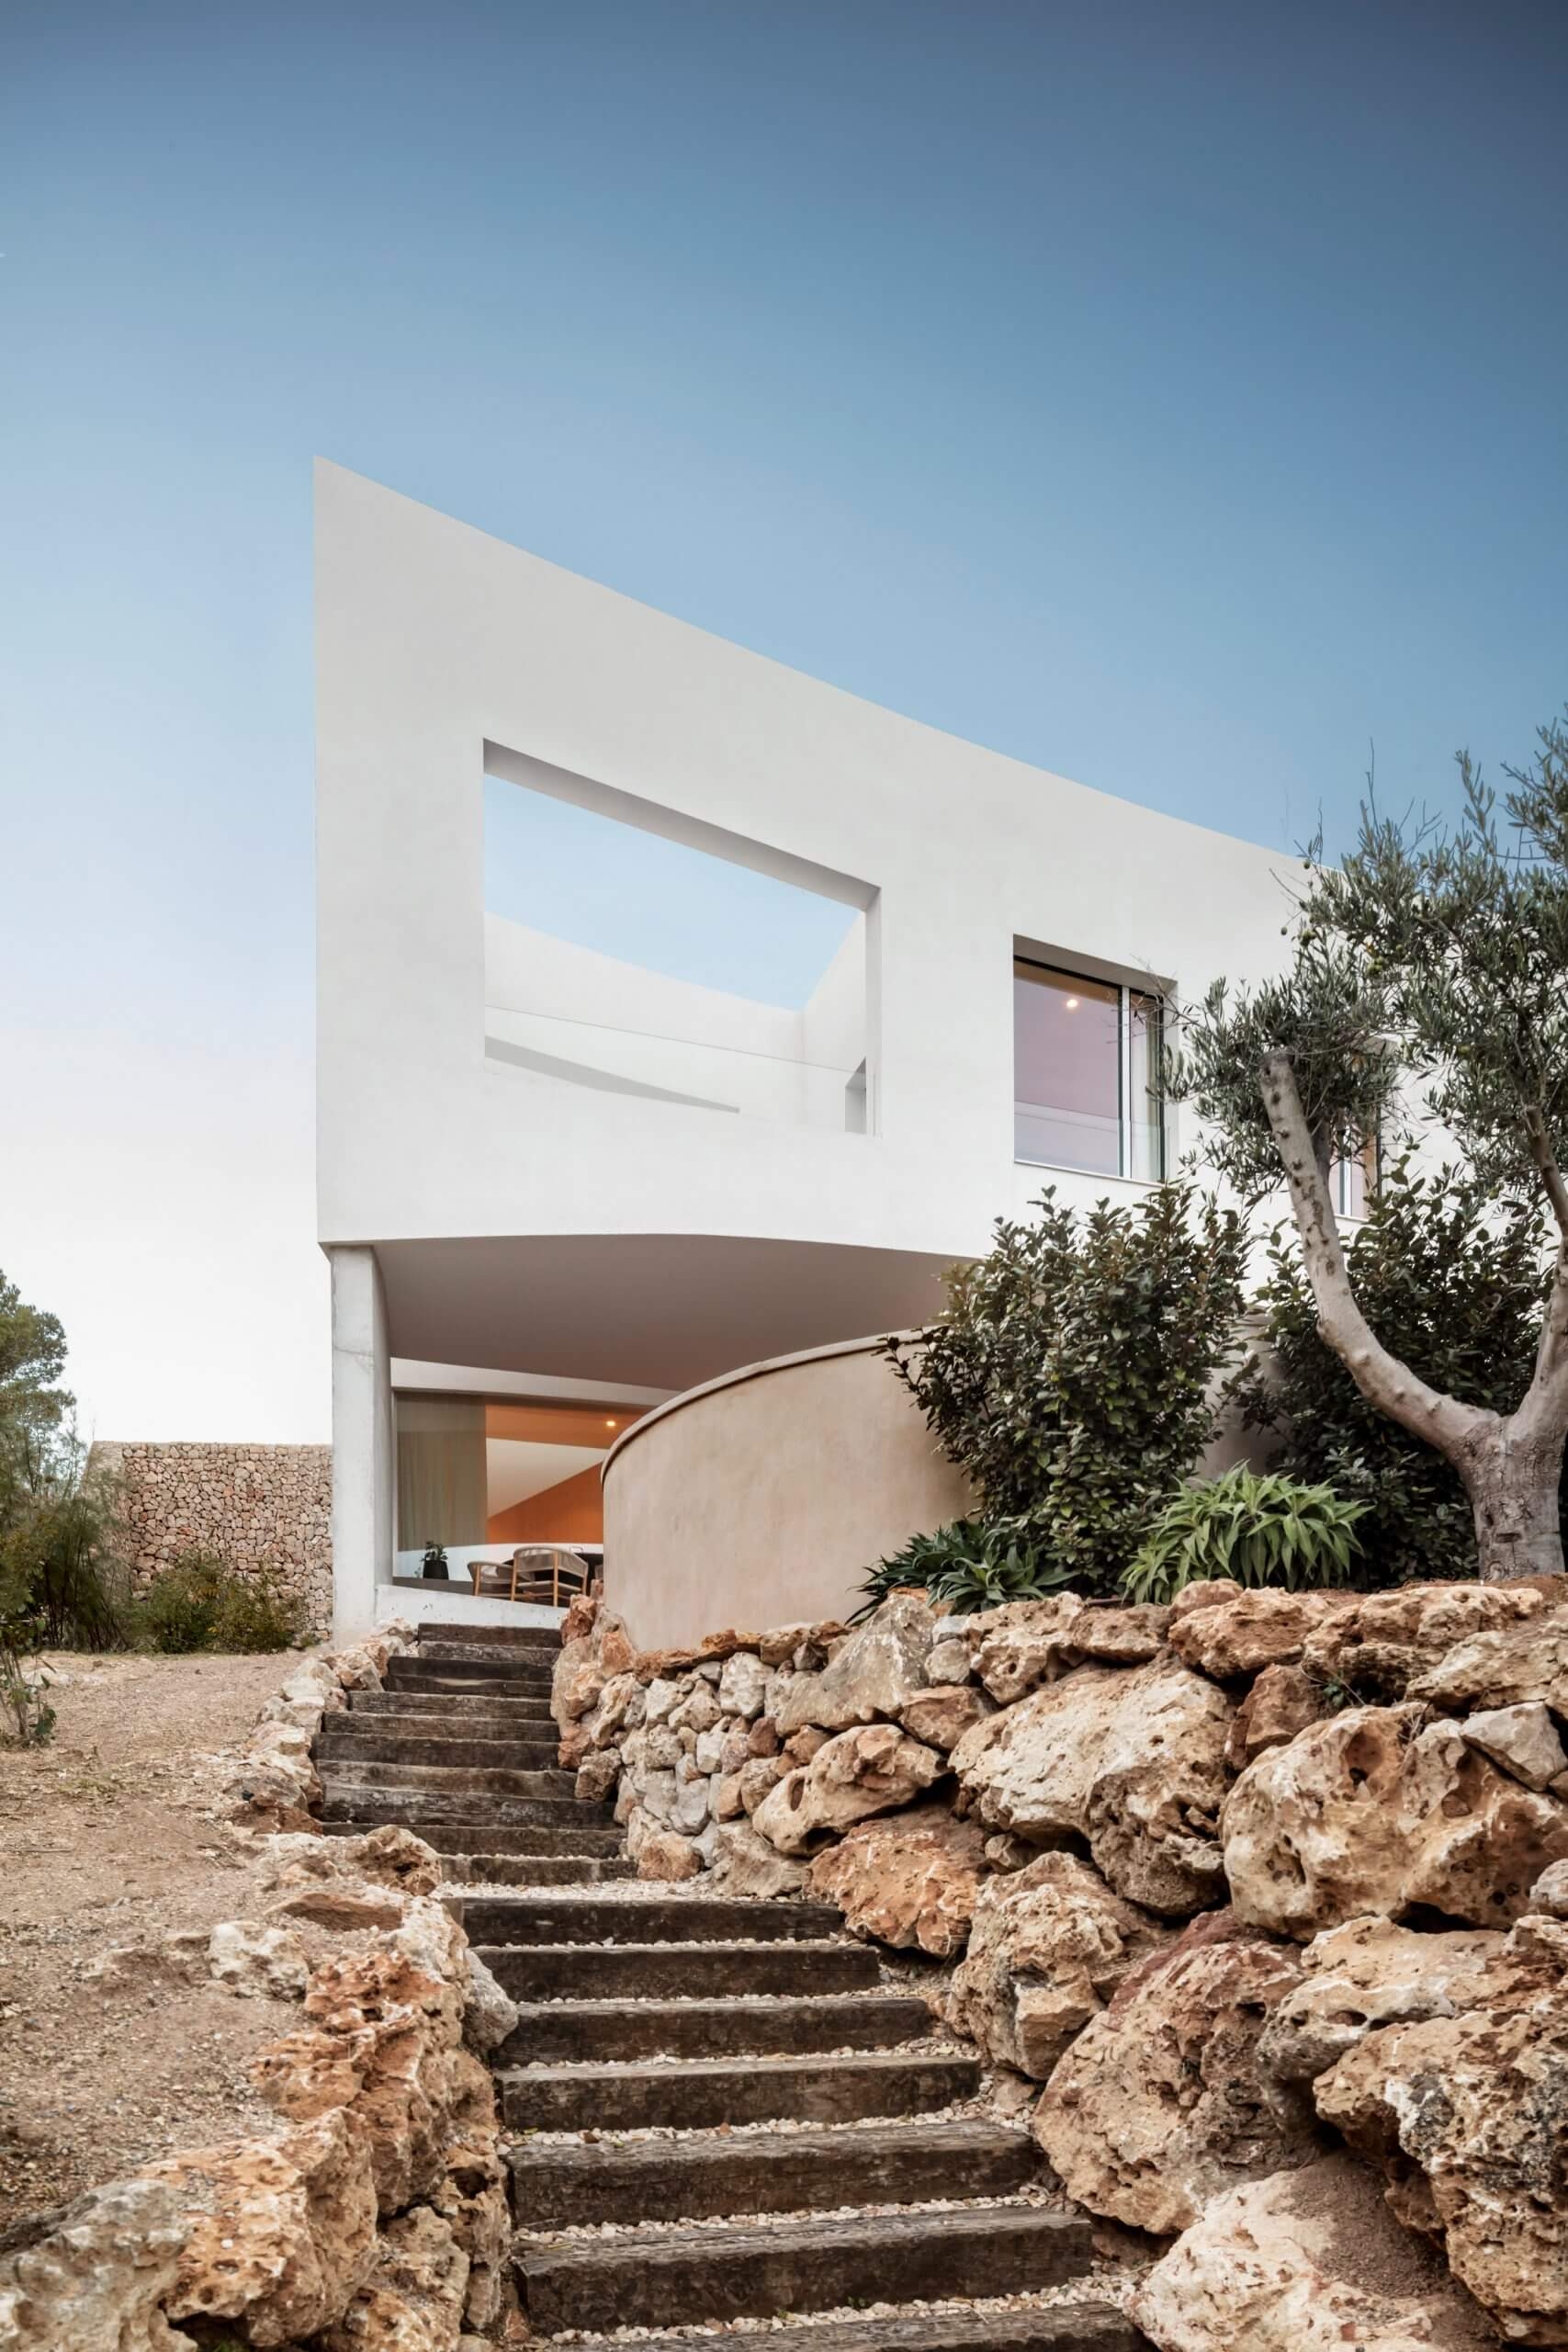 nomo studio curved house menorca spain architecture residential dezeen 2364 col 22 scaled 1